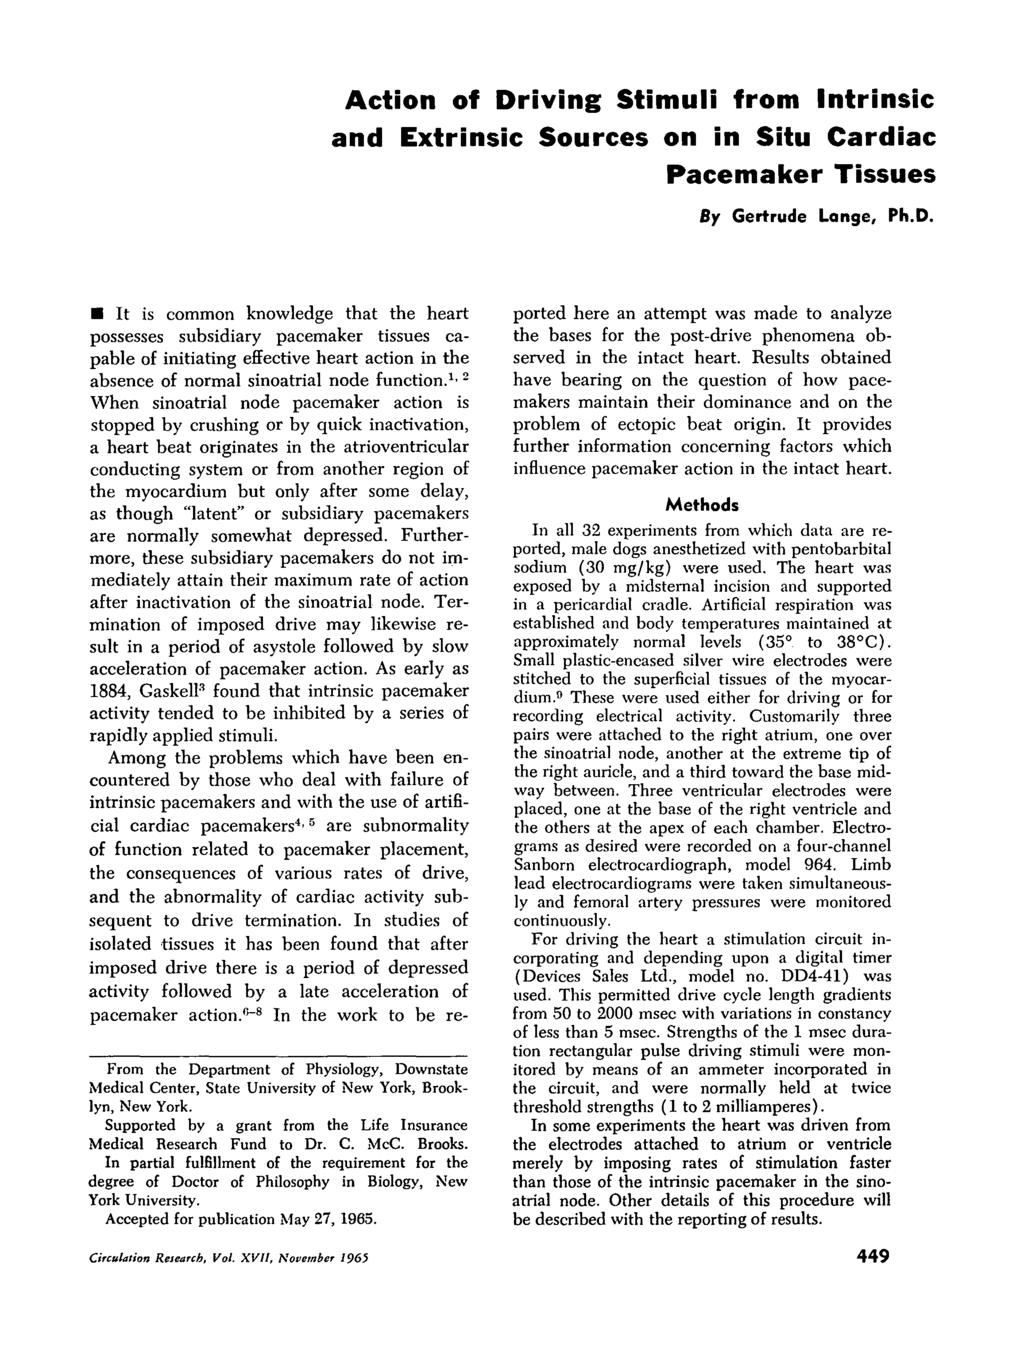 Action of Driving Stimuli from Intrinsic and Extrinsic Sources on in Situ Cardiac Pacemaker Tissues By Gertrude Lange, Ph.D. It is common knowledge that the heart possesses subsidiary pacemaker tissues capable of initiating effective heart action in the absence of normal sinoatrial node function.